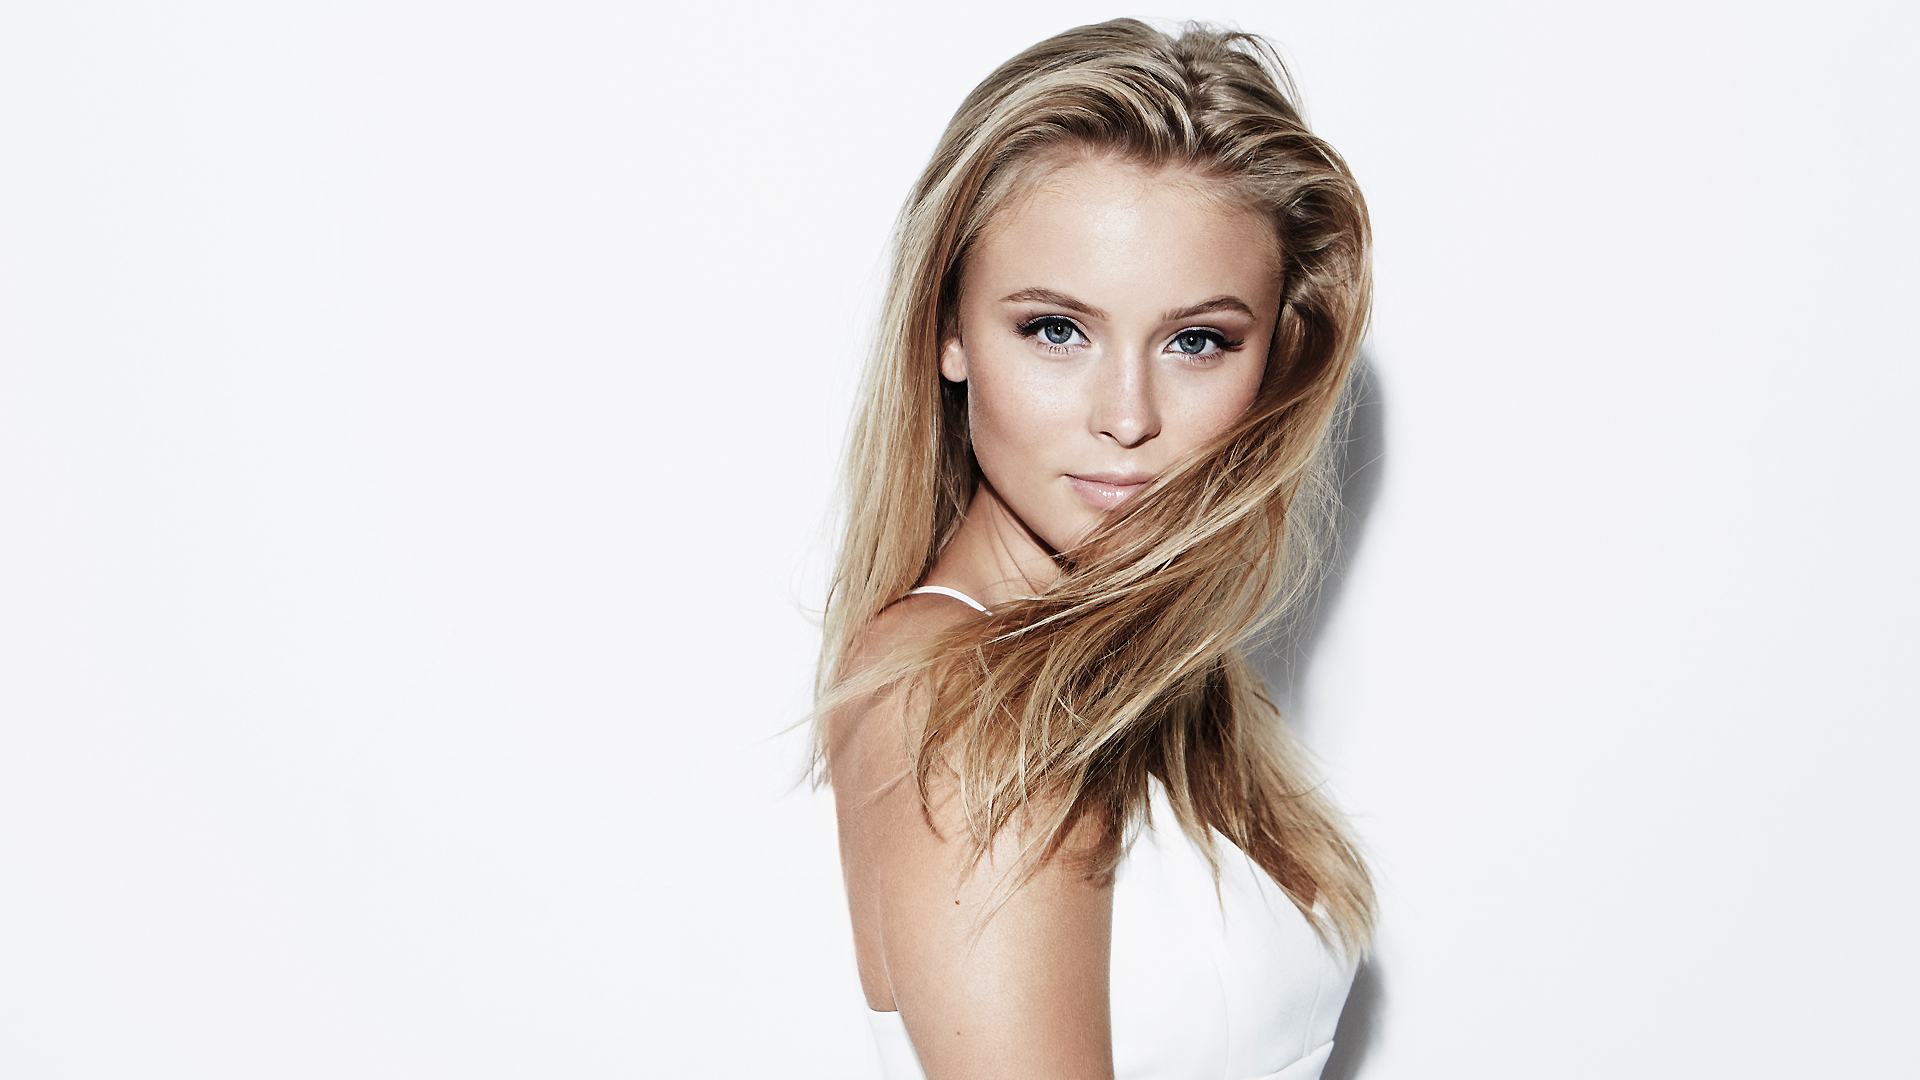 Zara Larsson Interview: 'End Of Time' And New Album